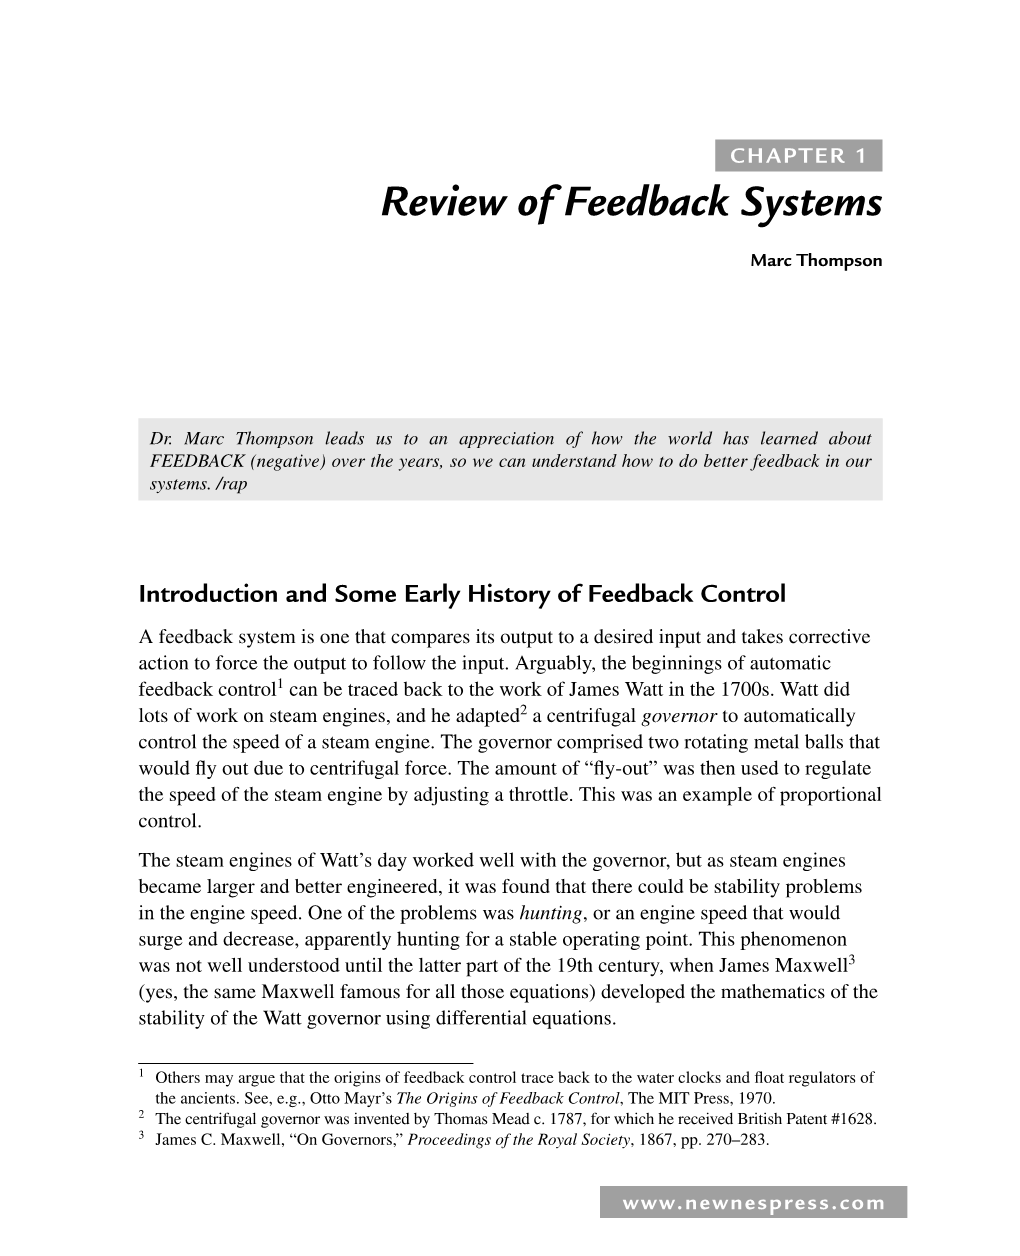 Review of Feedback Systems